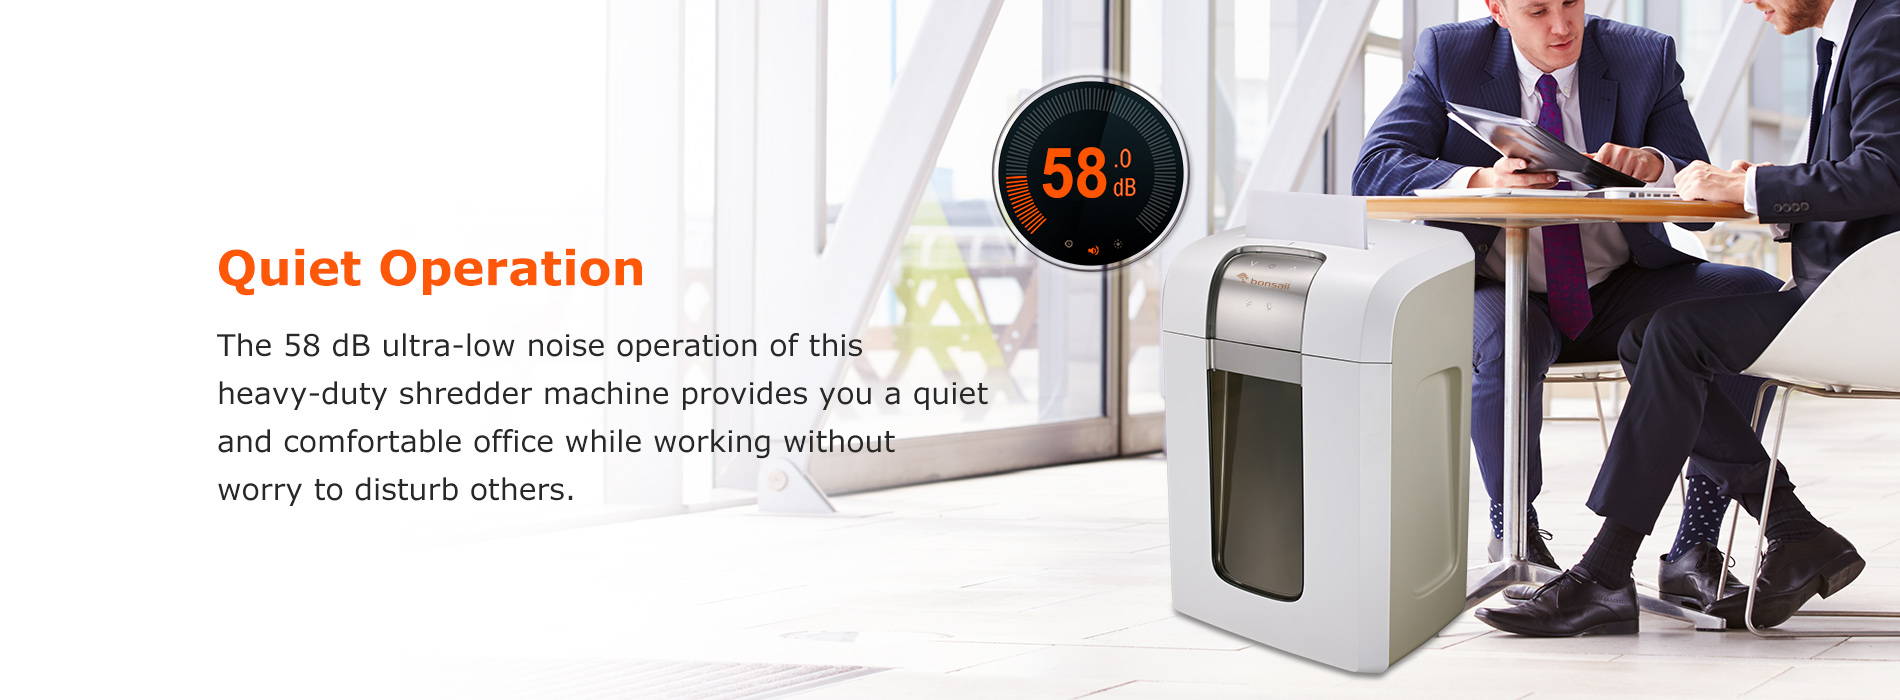 Quiet Operation The 58 dB ultra-low noise operation of this heavy-duty shredder machine provides you a quiet and comfortable office while working without worry to disturb others.